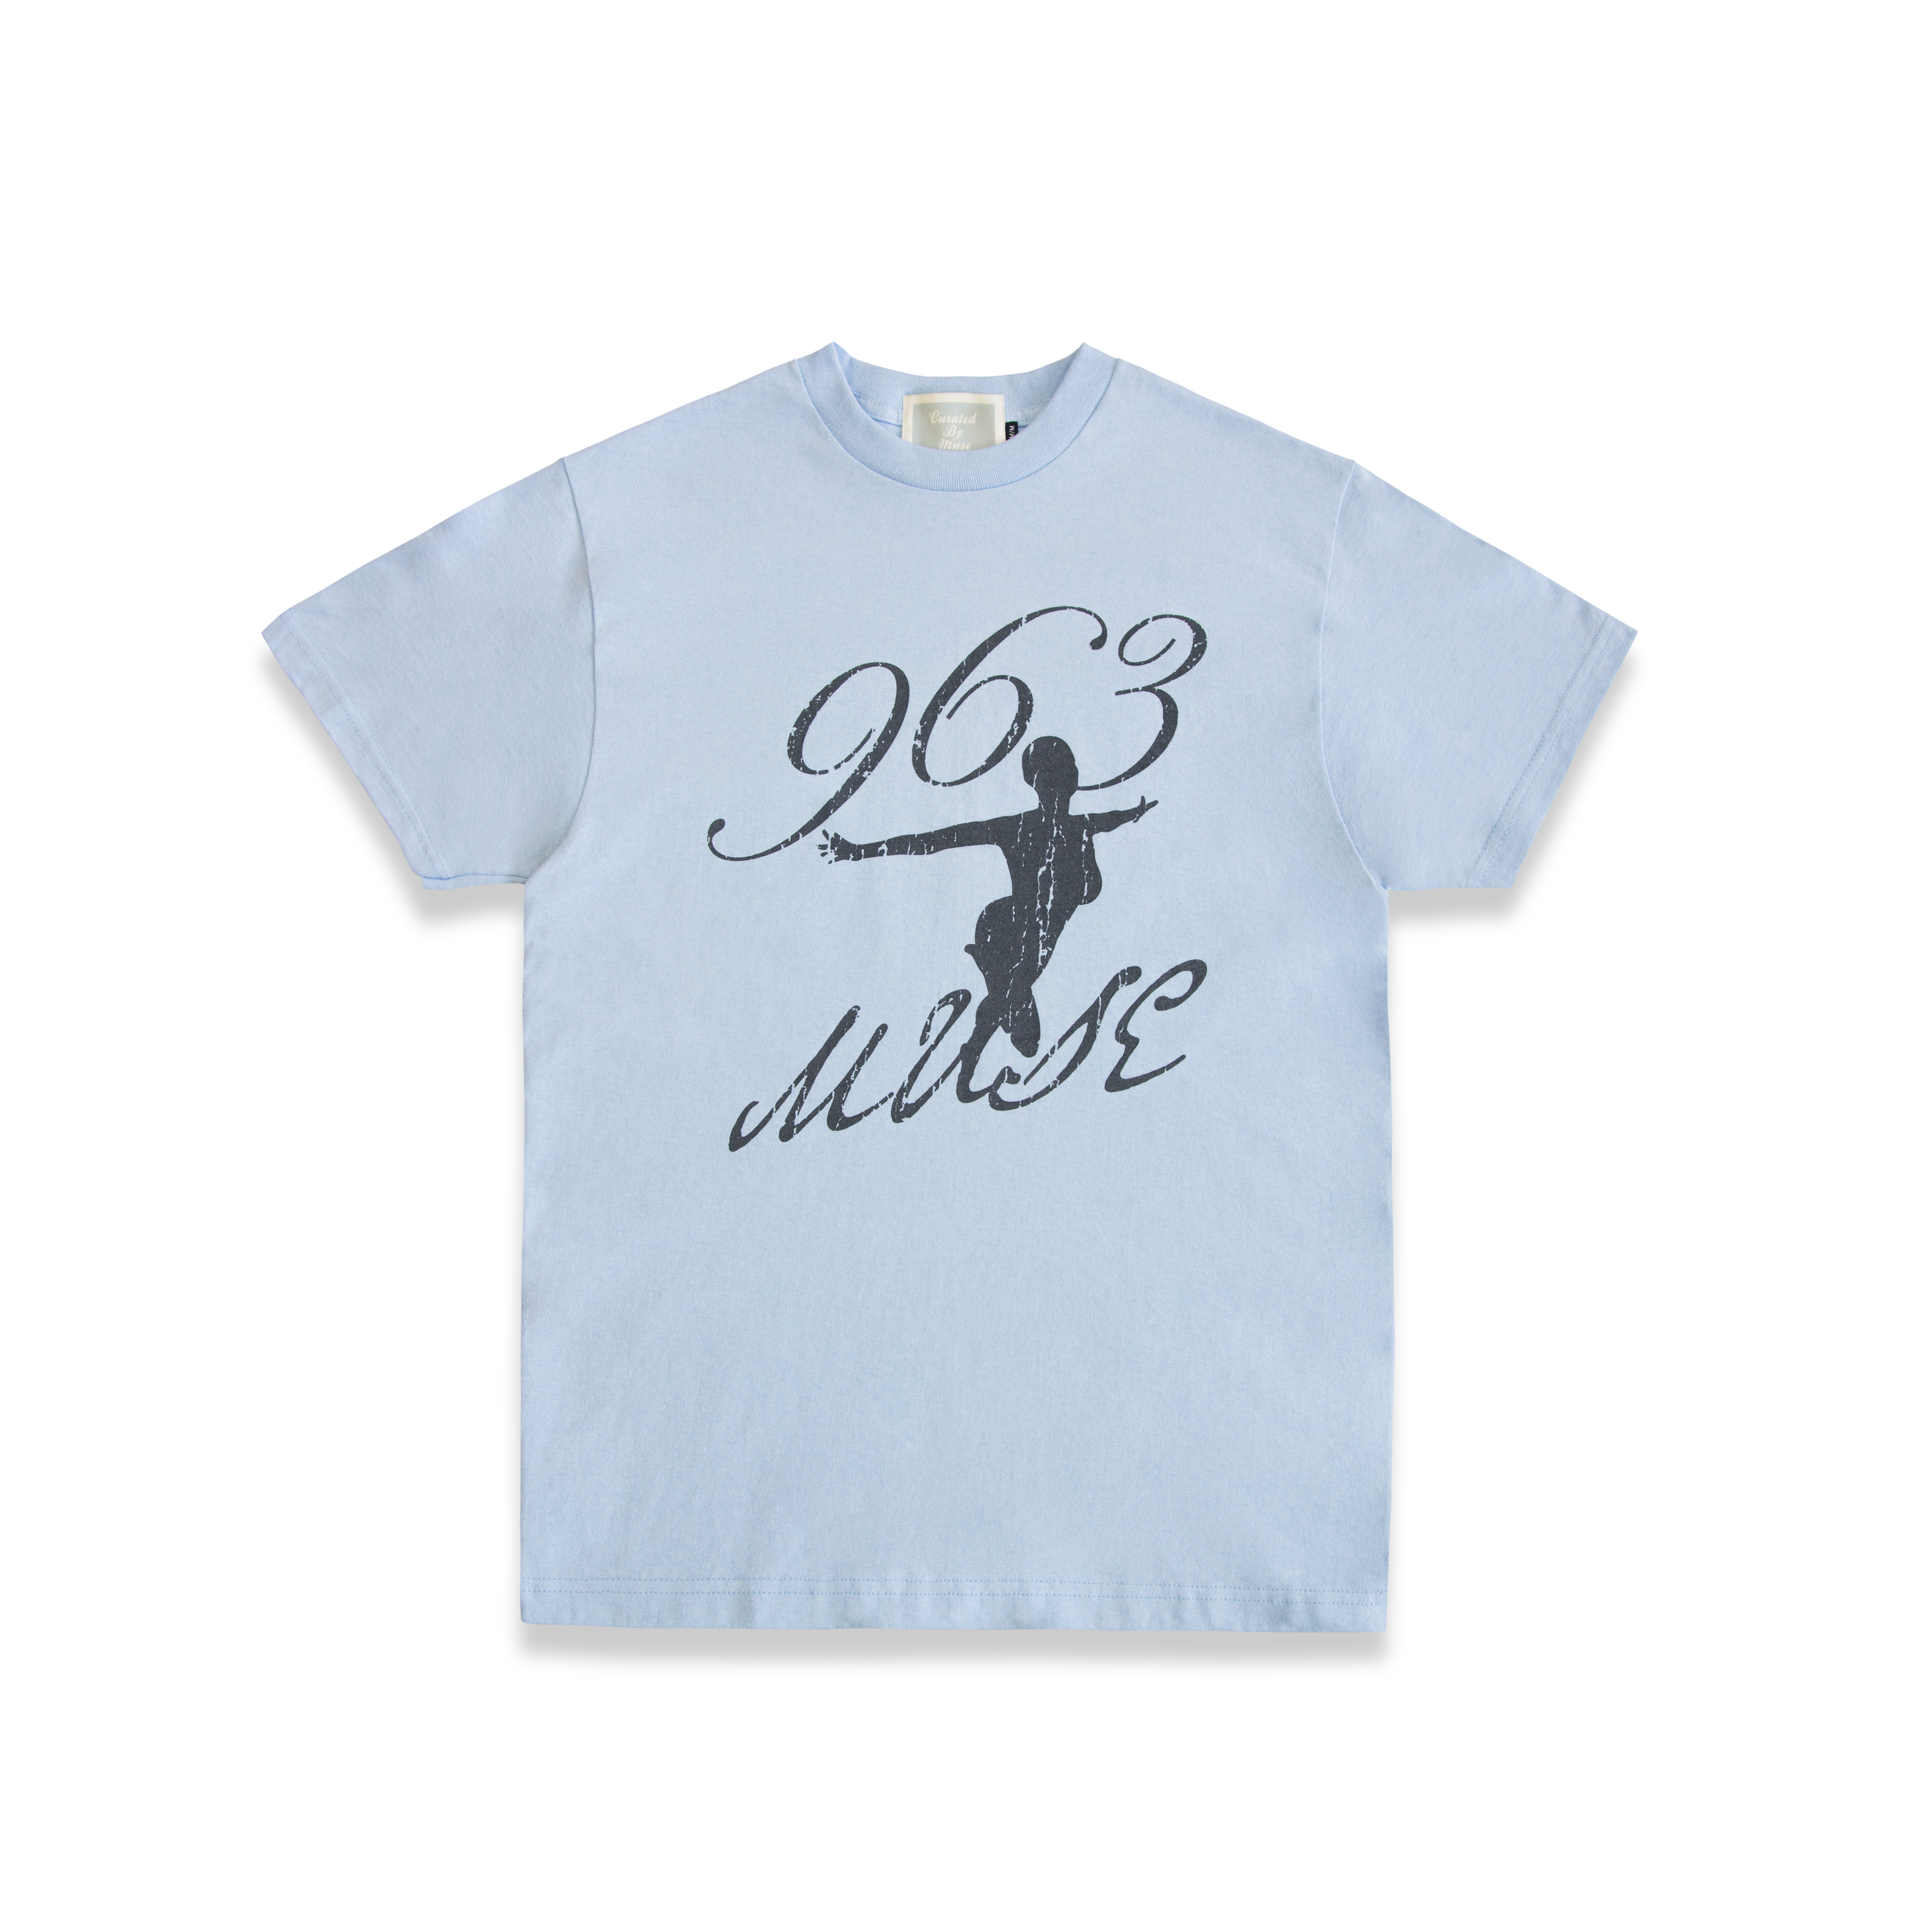 Limited Edition 963 T-shirt - Baby Blue